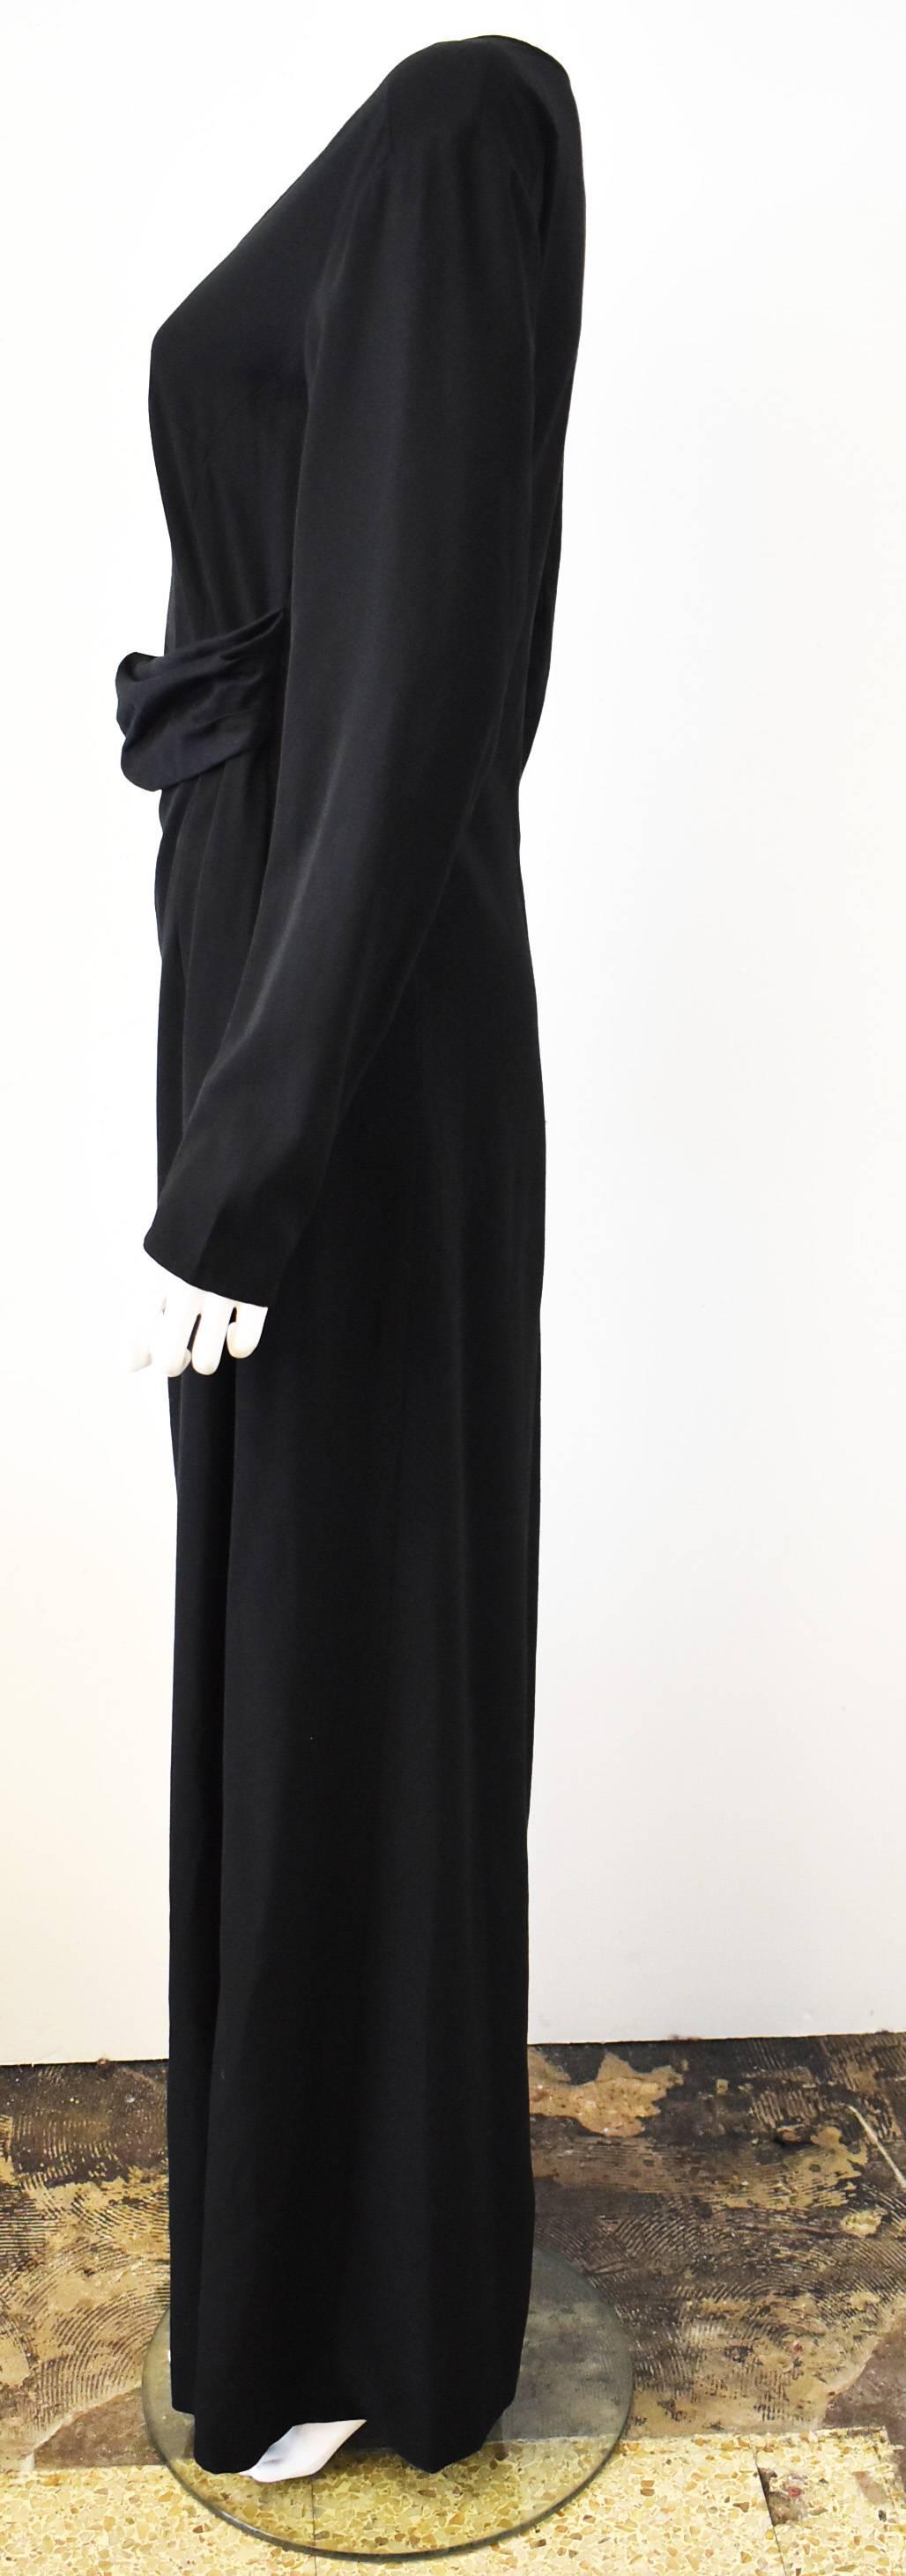 A floor-length black dress with long sleeves by Belgian designer Dries Van Noten. The dress has a simple A-line shape, round collar, and loose shape but has an unusual opening at the front along the waistline. This gap creates a sort of ‘tucked in